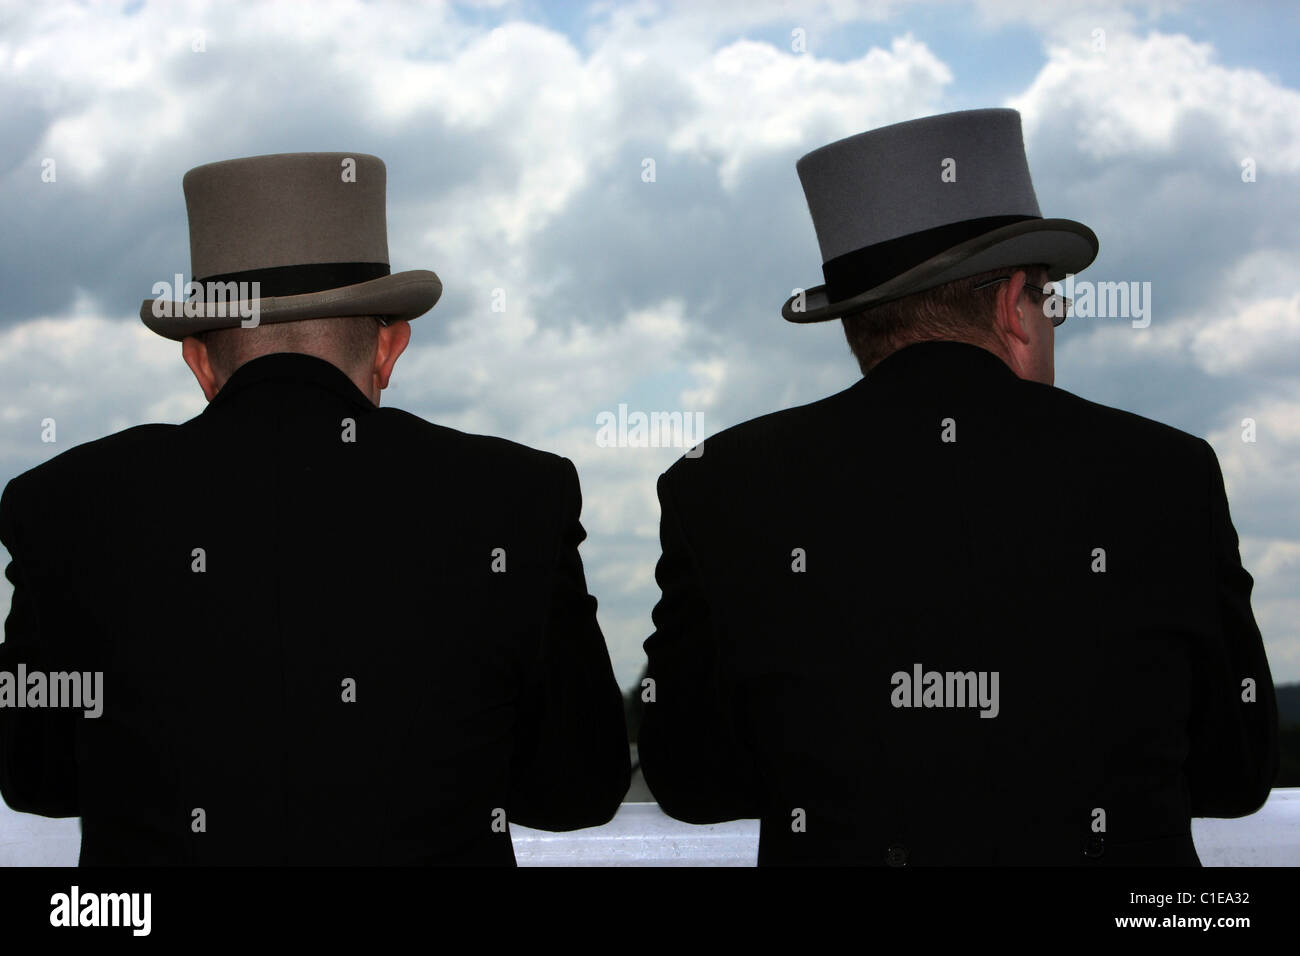 Men in top hats in front of cloudy sky, Epsom, United Kingdom Stock Photo